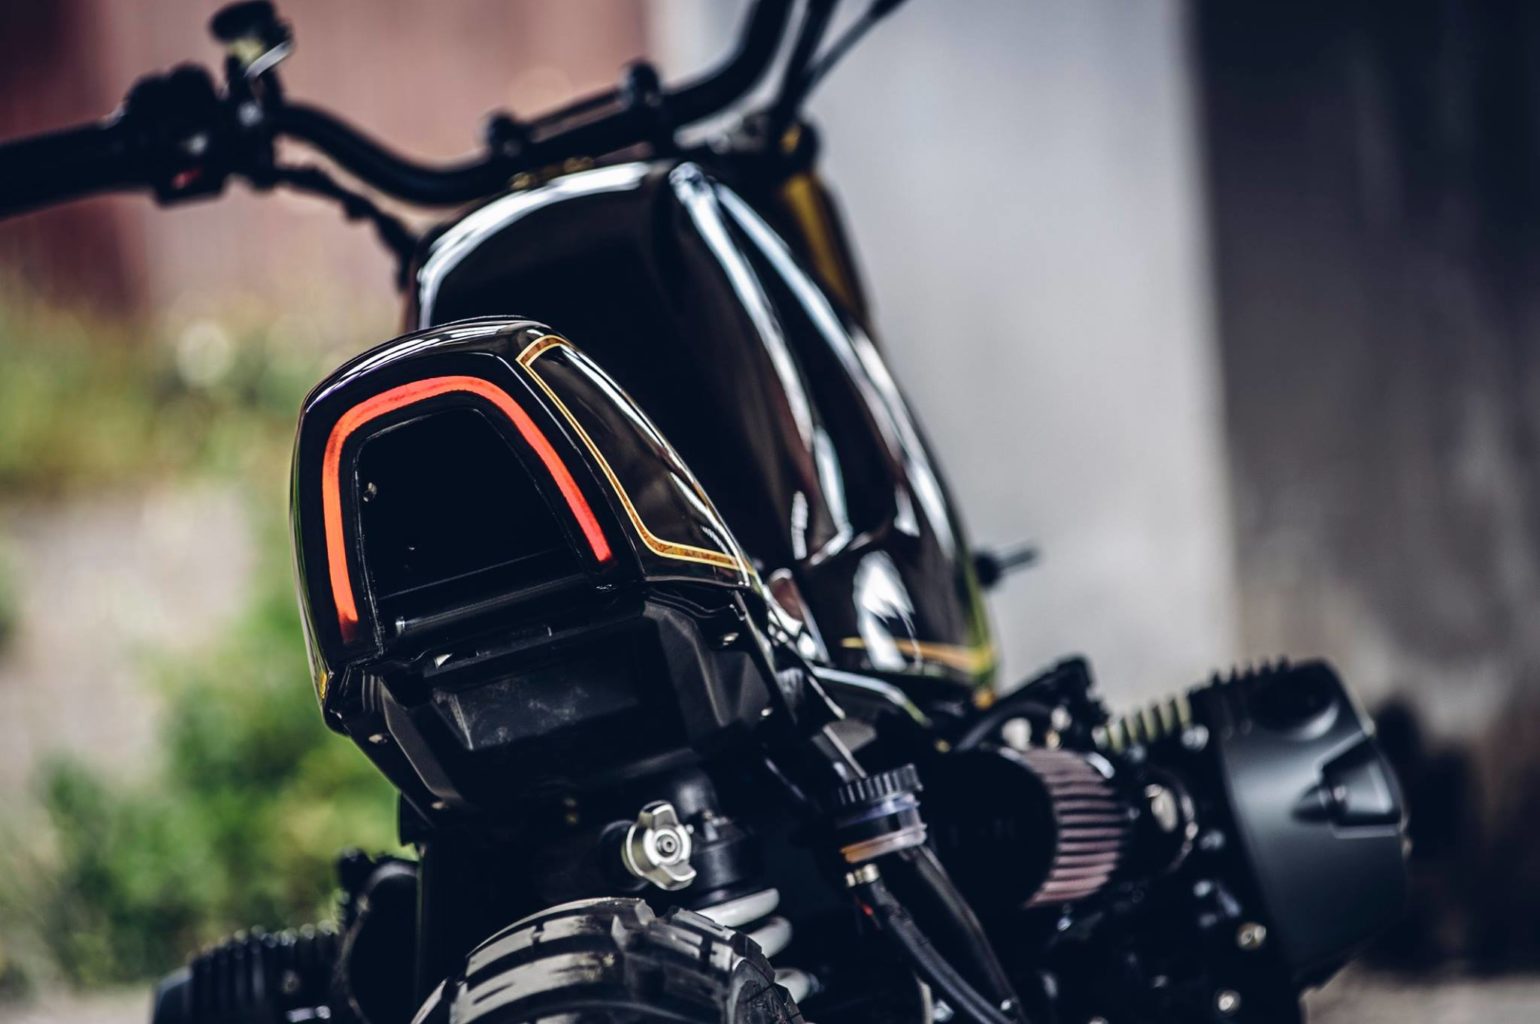 BMW R NineT "Snickers" by Onehandmade